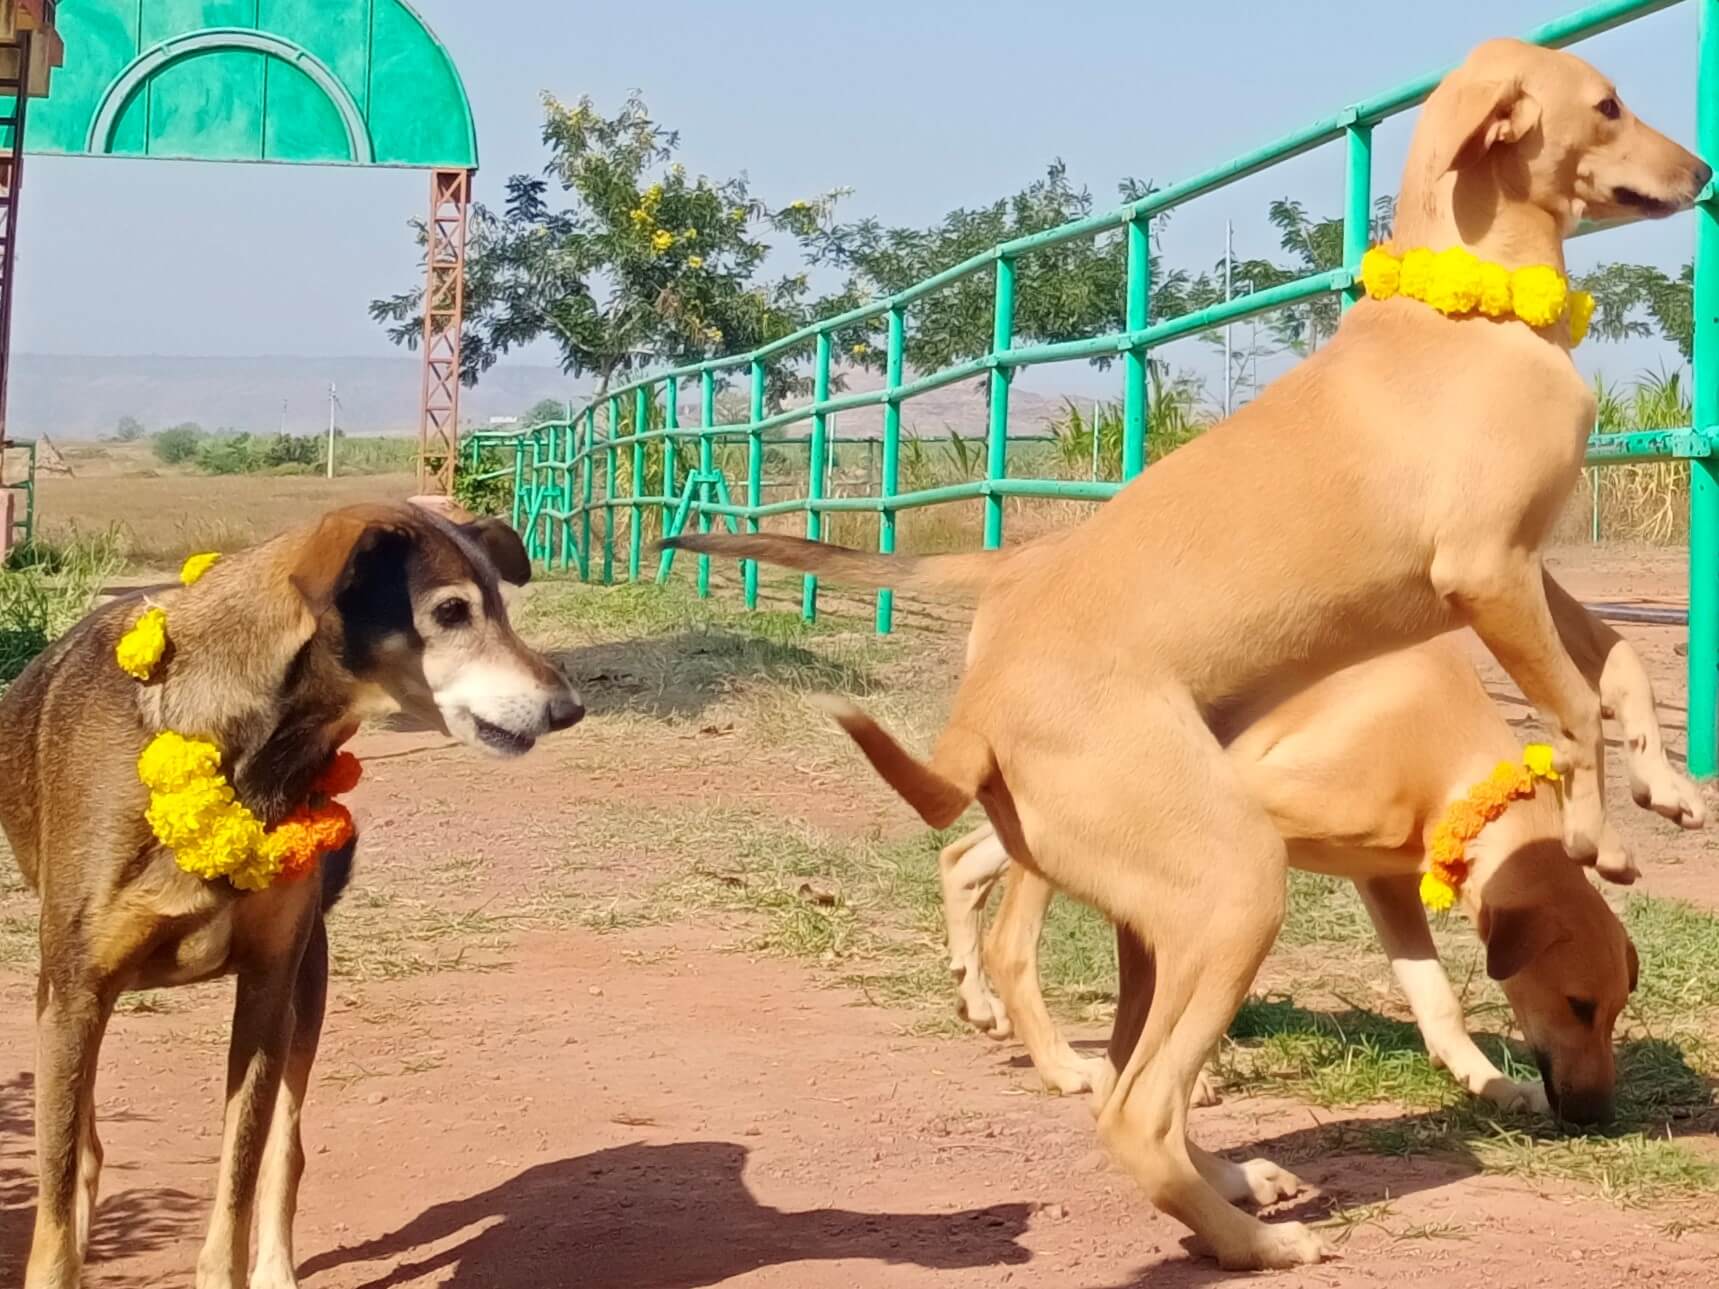 Guddi, Sweetie, and Vishal—three of the sanctuary's resident rescued canines—could barely contain their excitement over all the tasty Diwali treats.